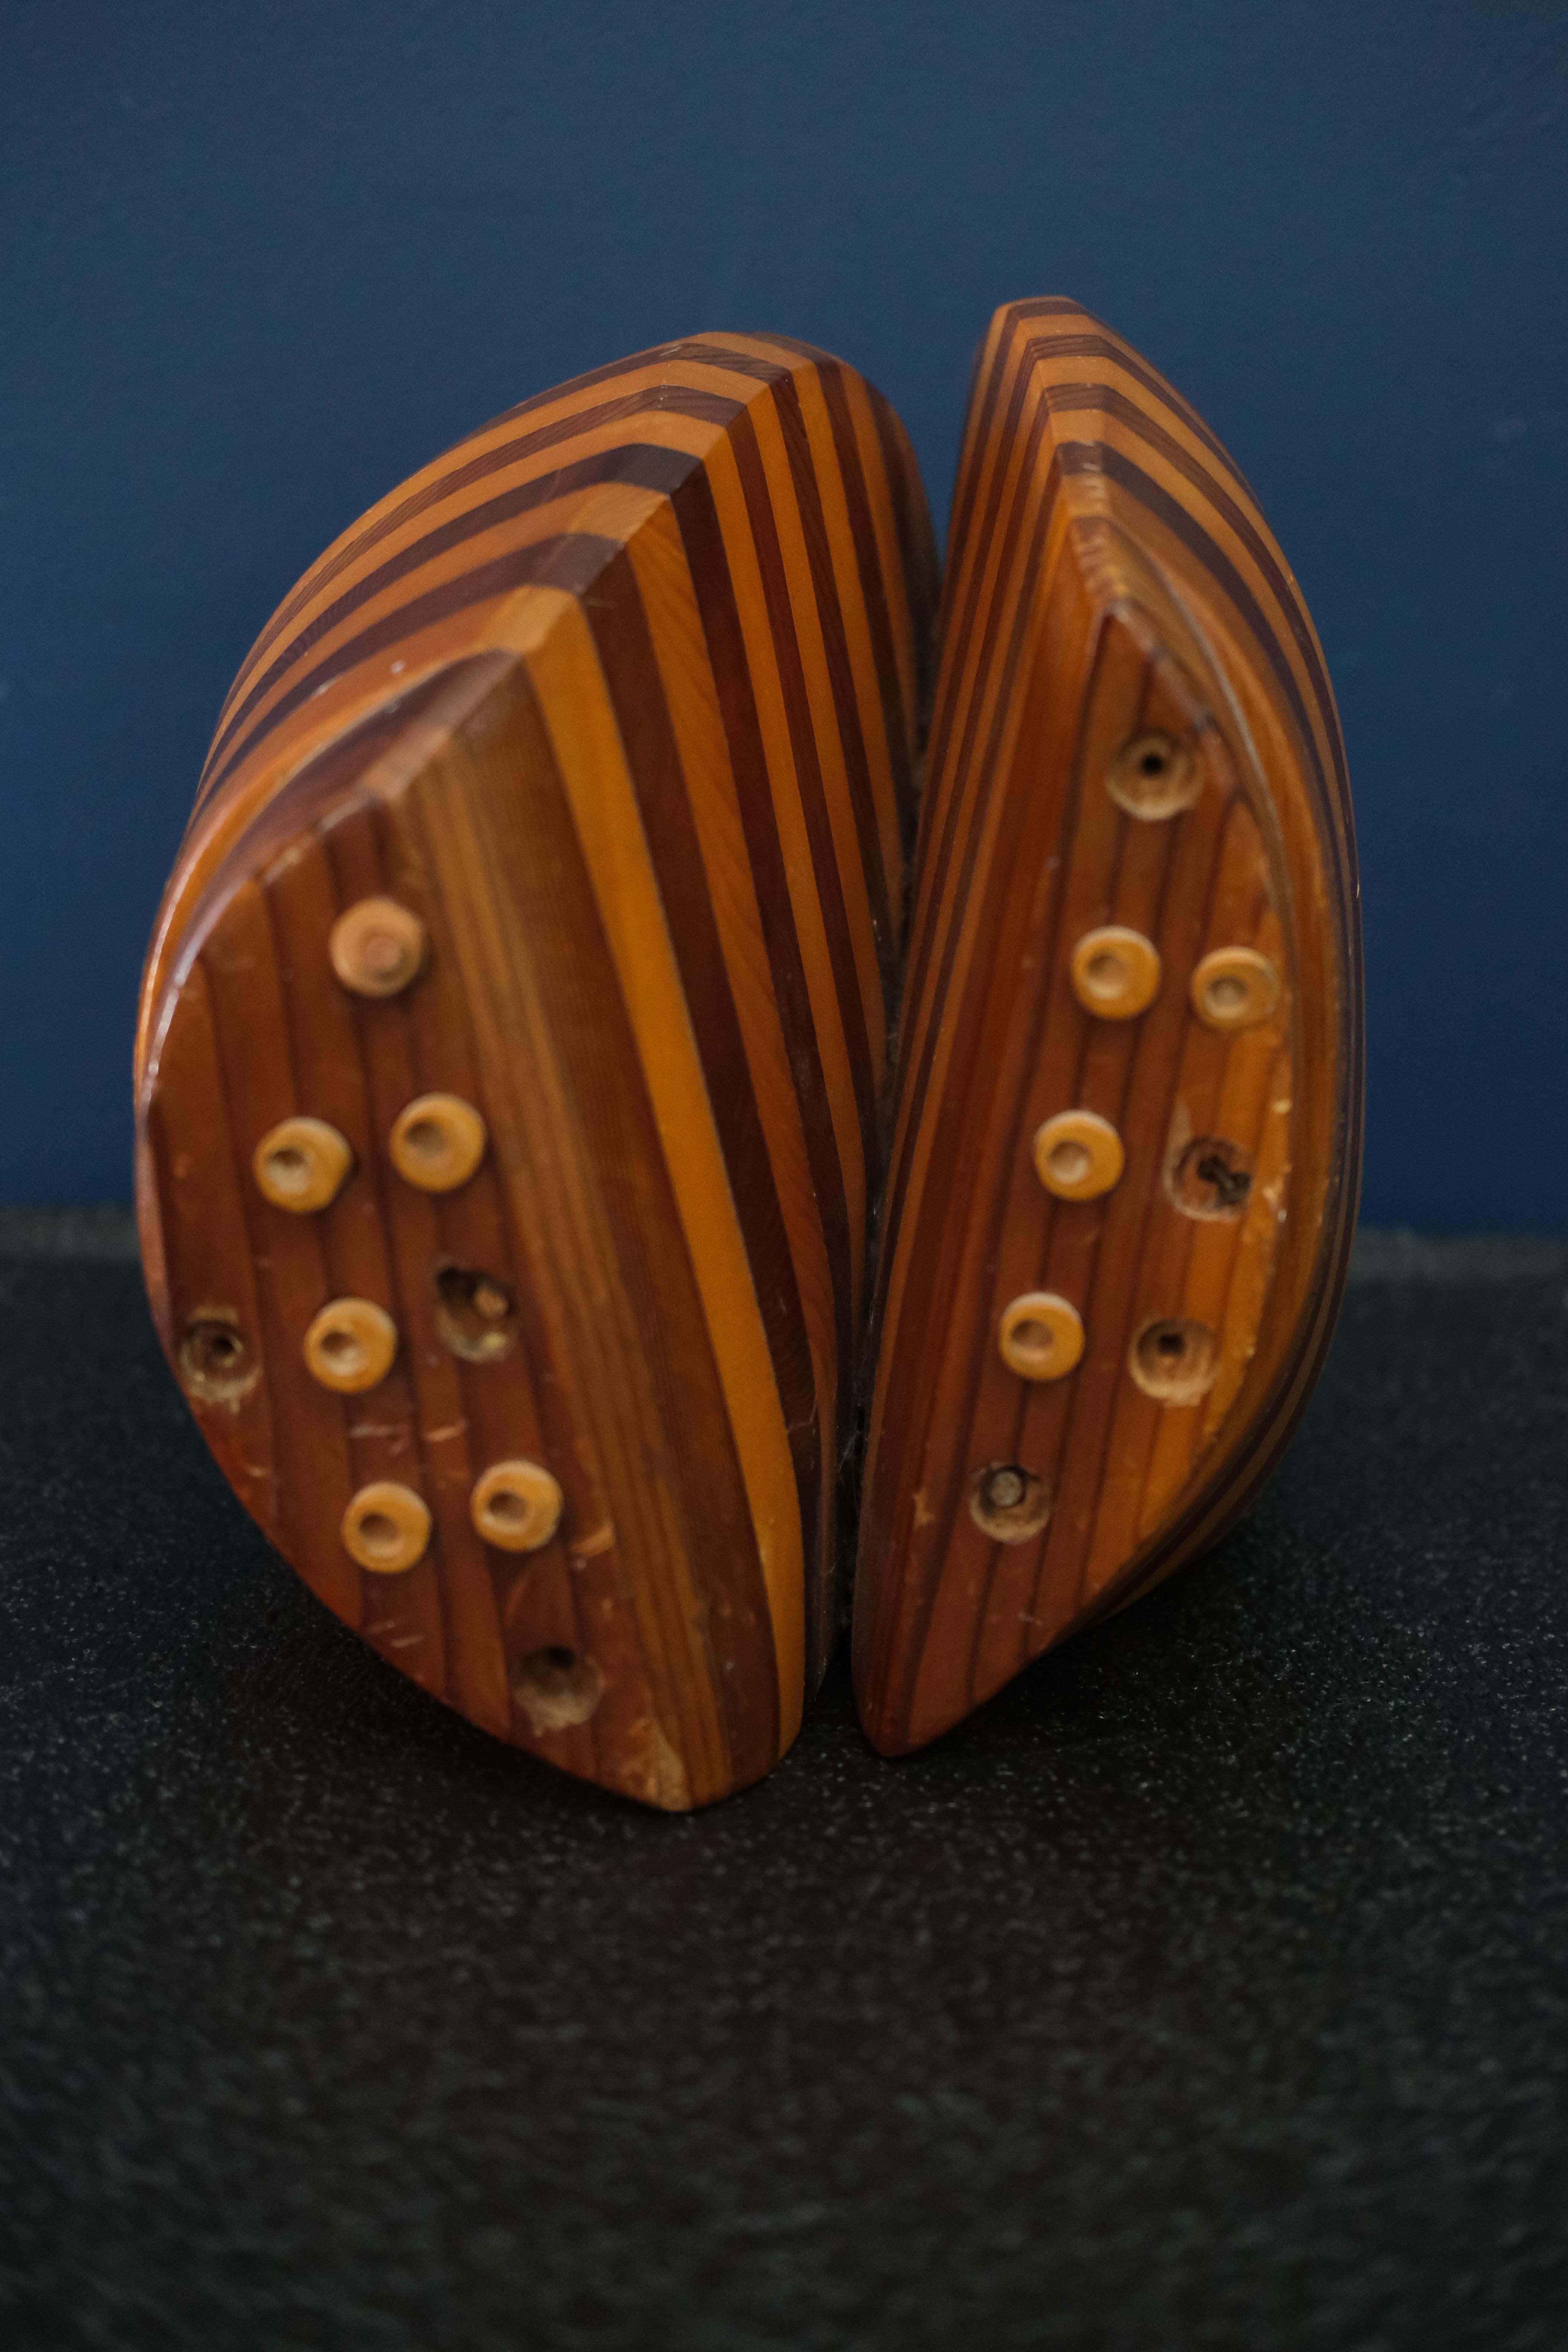 Carved wood abstract organic wooden sculpture.
Signed: T. Clasen.
California, 1970's.
 